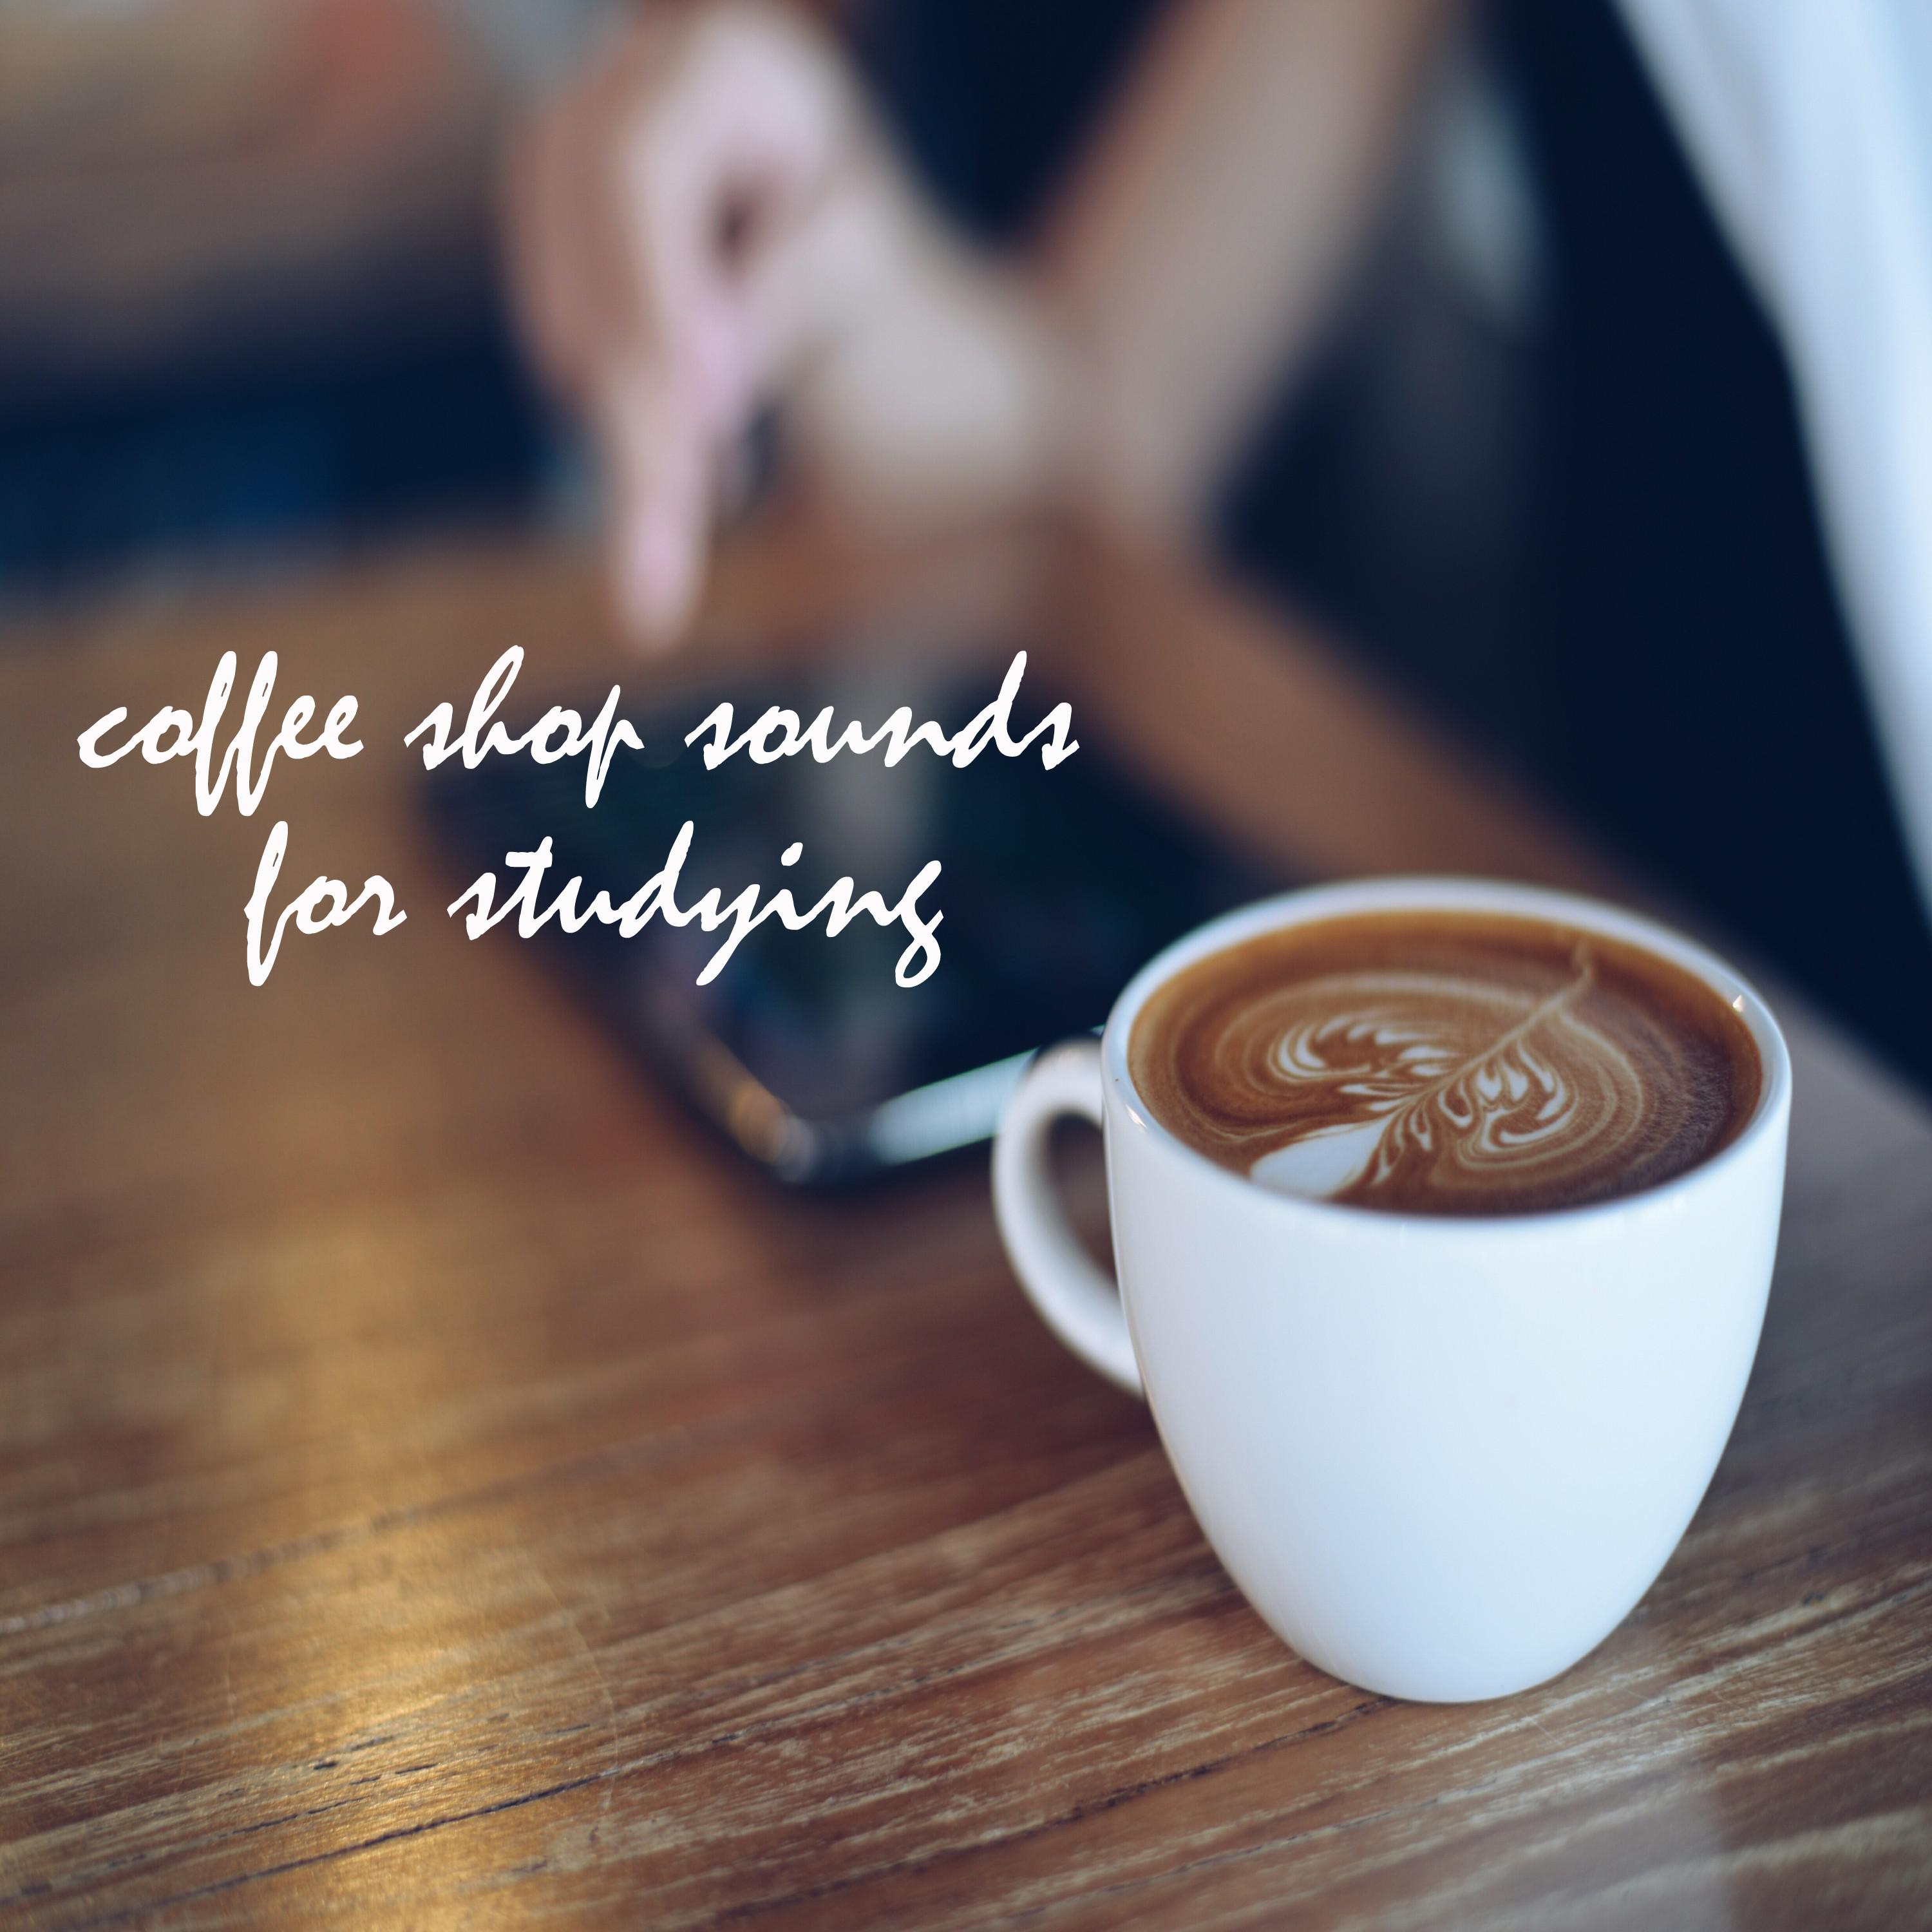 Coffee Shop Sounds for Studying and Working, Pt. 17